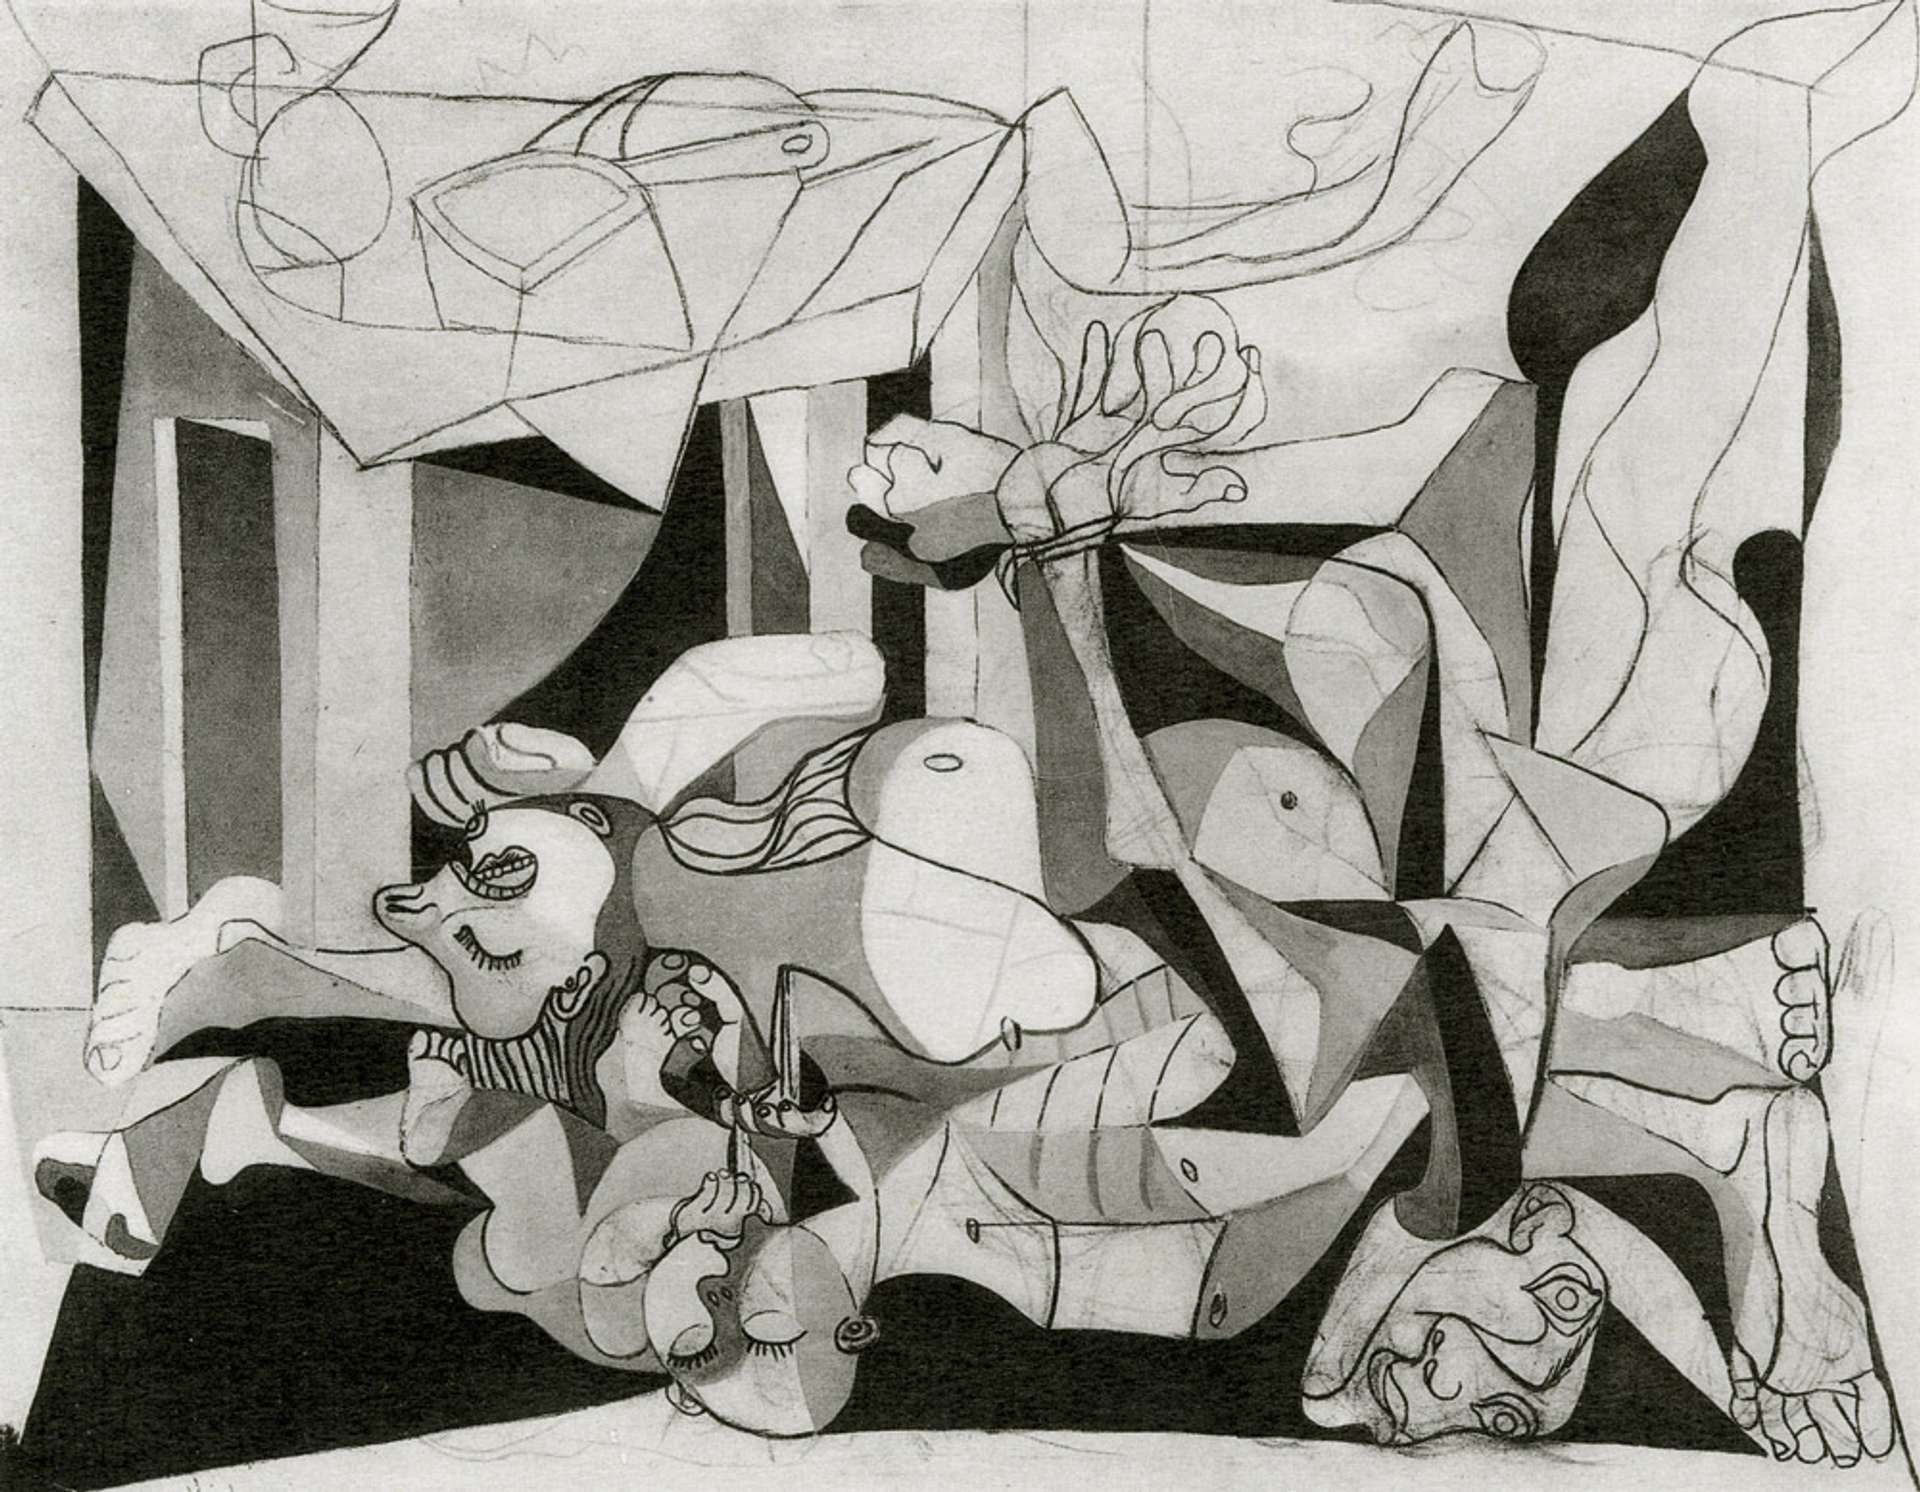 Dismembered cubist figures piled together on the floor 